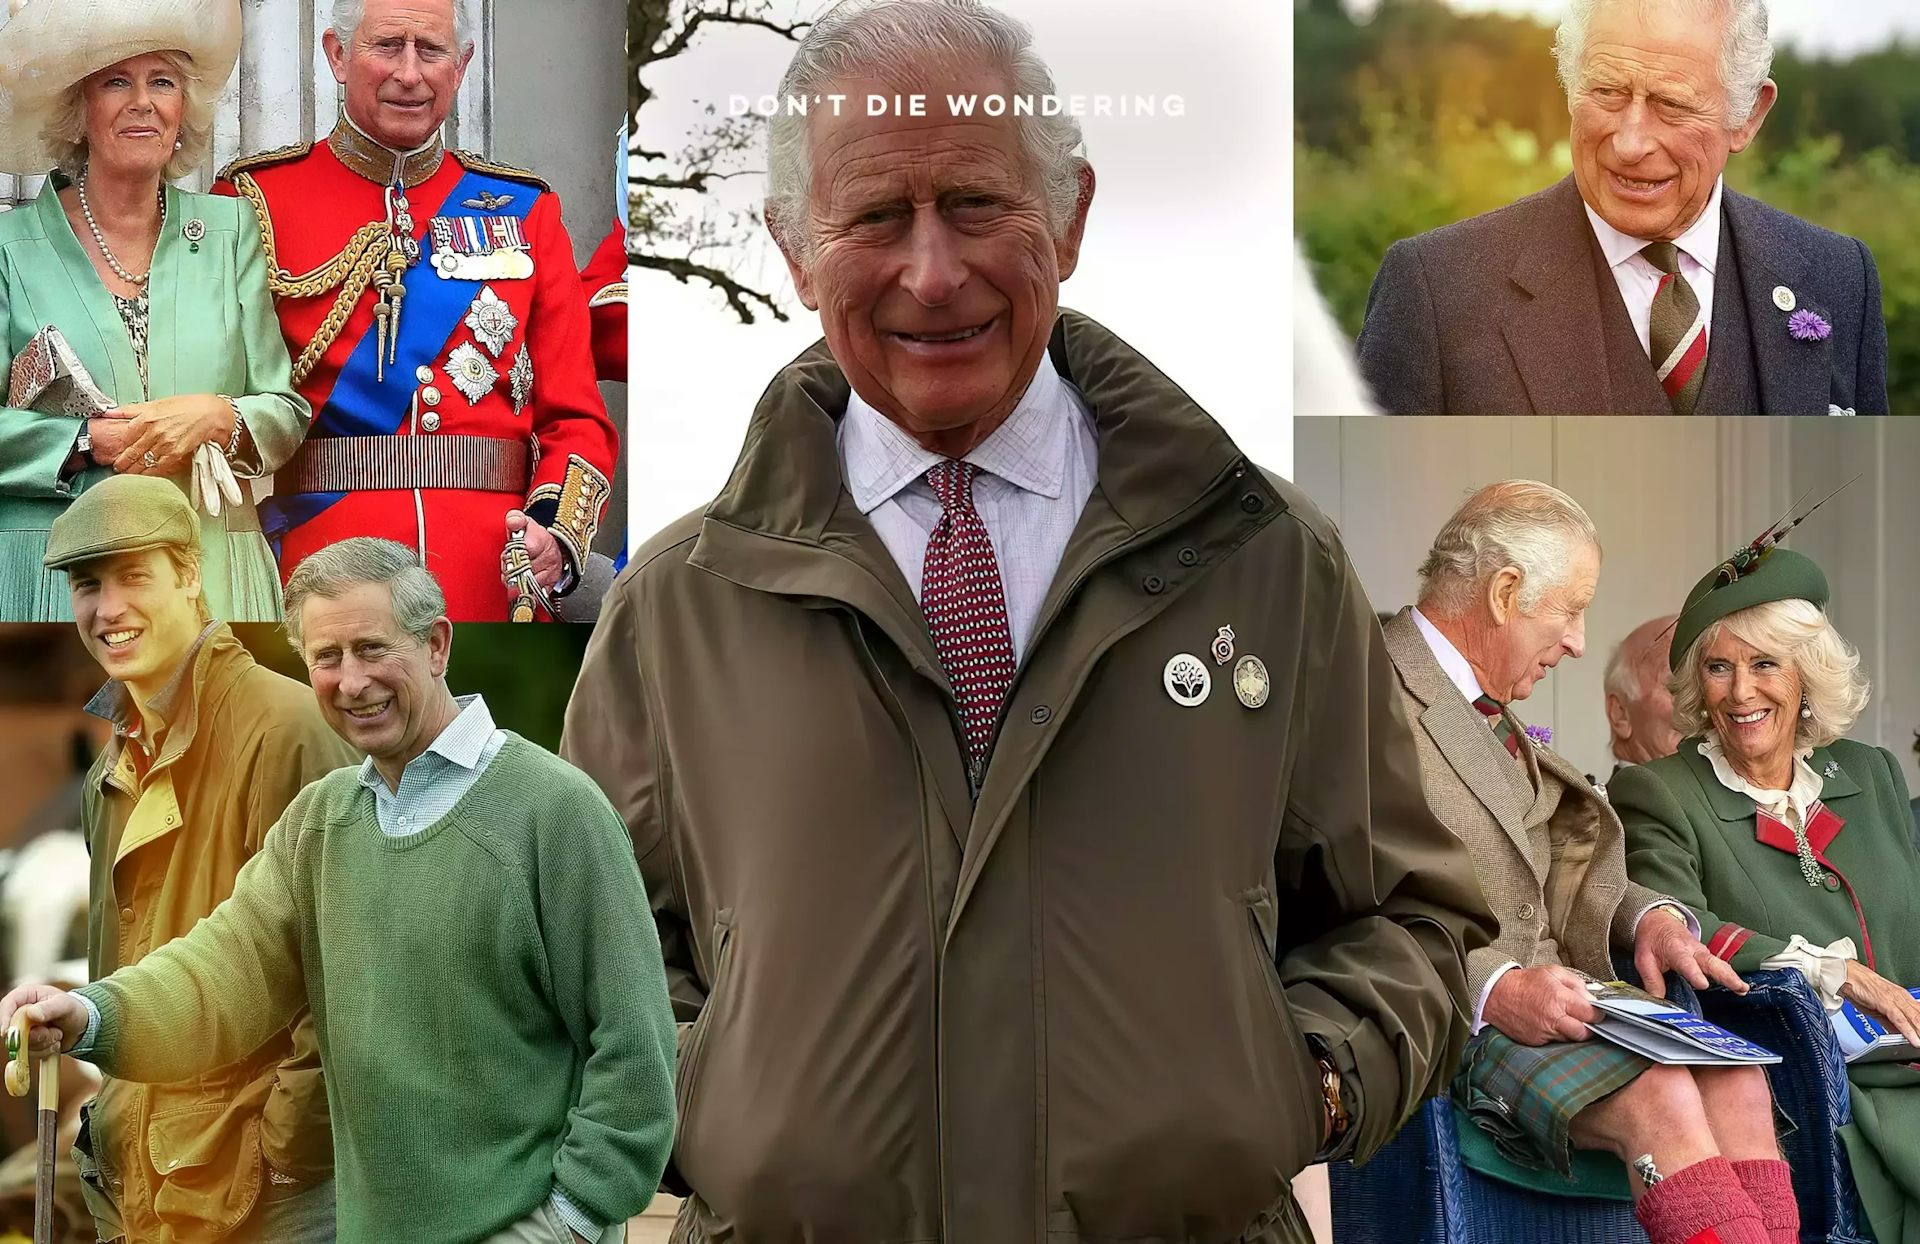 Looking Back on King Charles III and his Fashion Over the Years